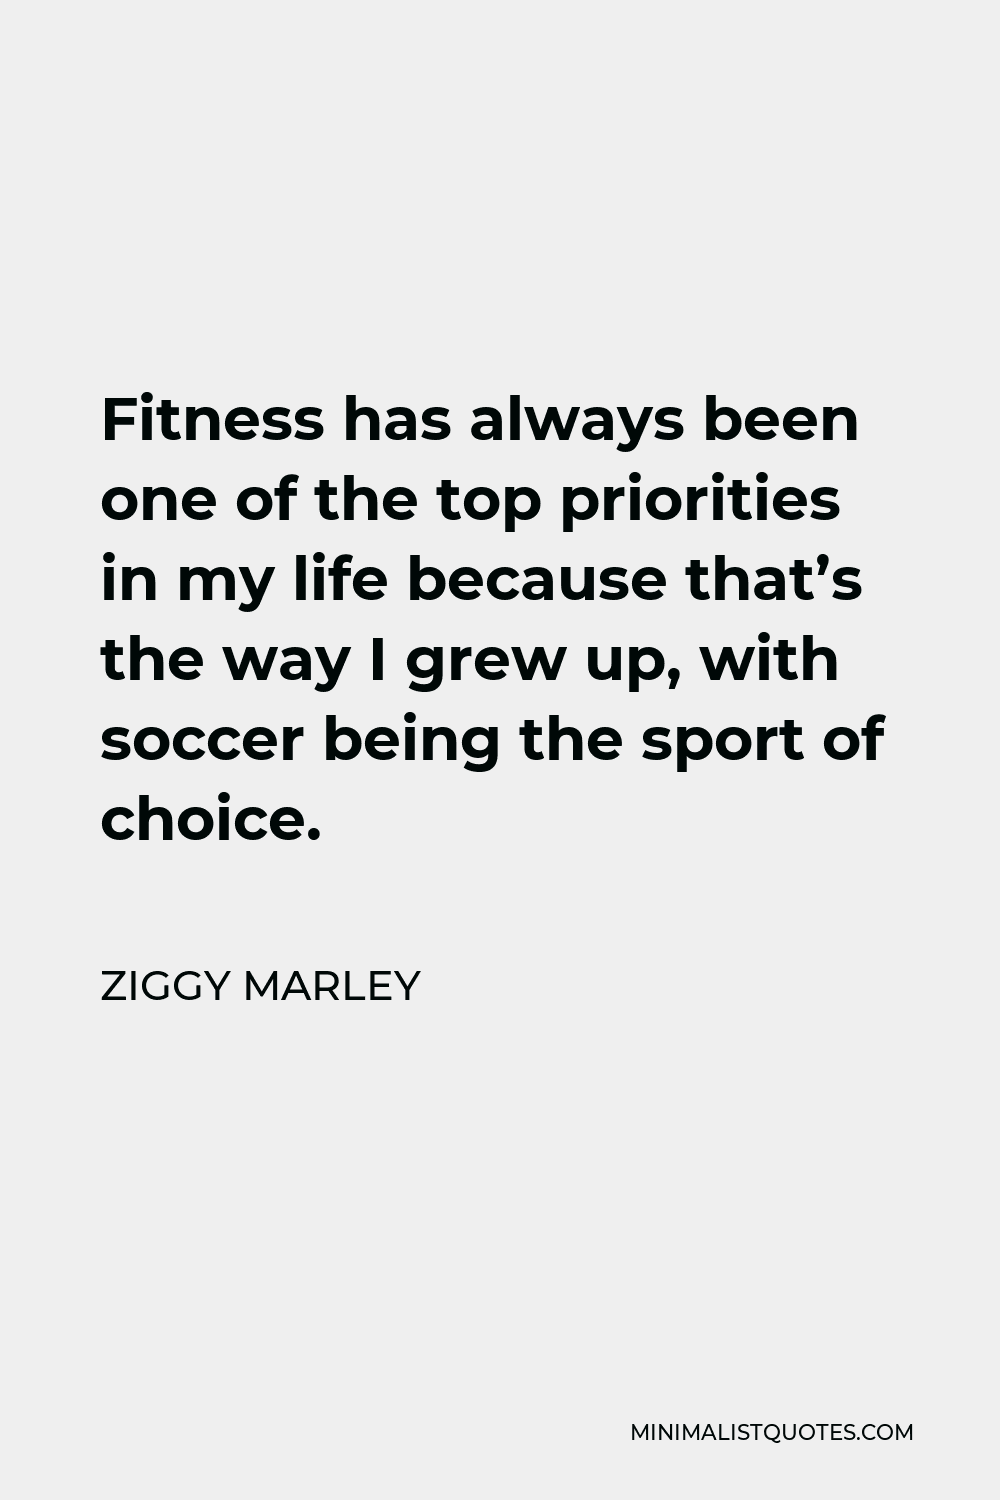 Ziggy Marley Quote - Fitness has always been one of the top priorities in my life because that’s the way I grew up, with soccer being the sport of choice.